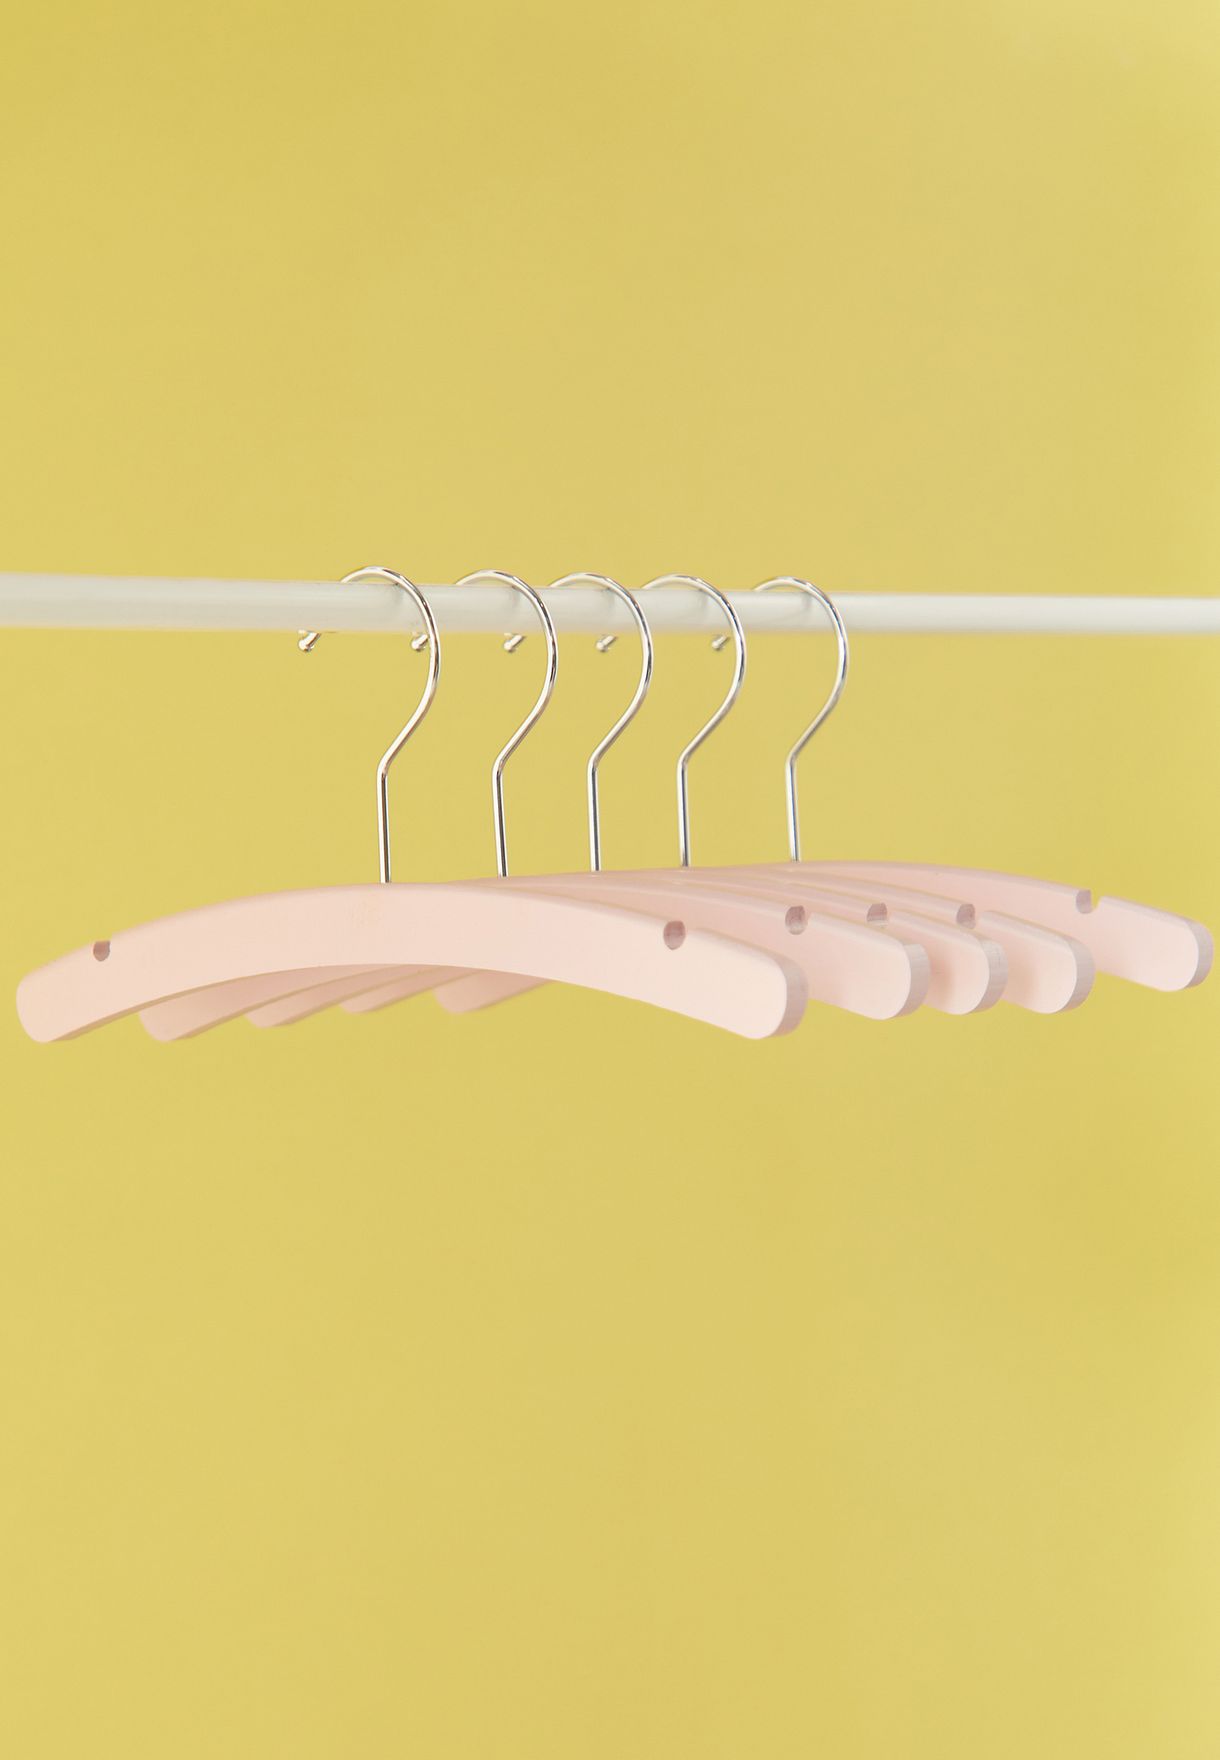 Set Of 5 Baby Clothes Hangers